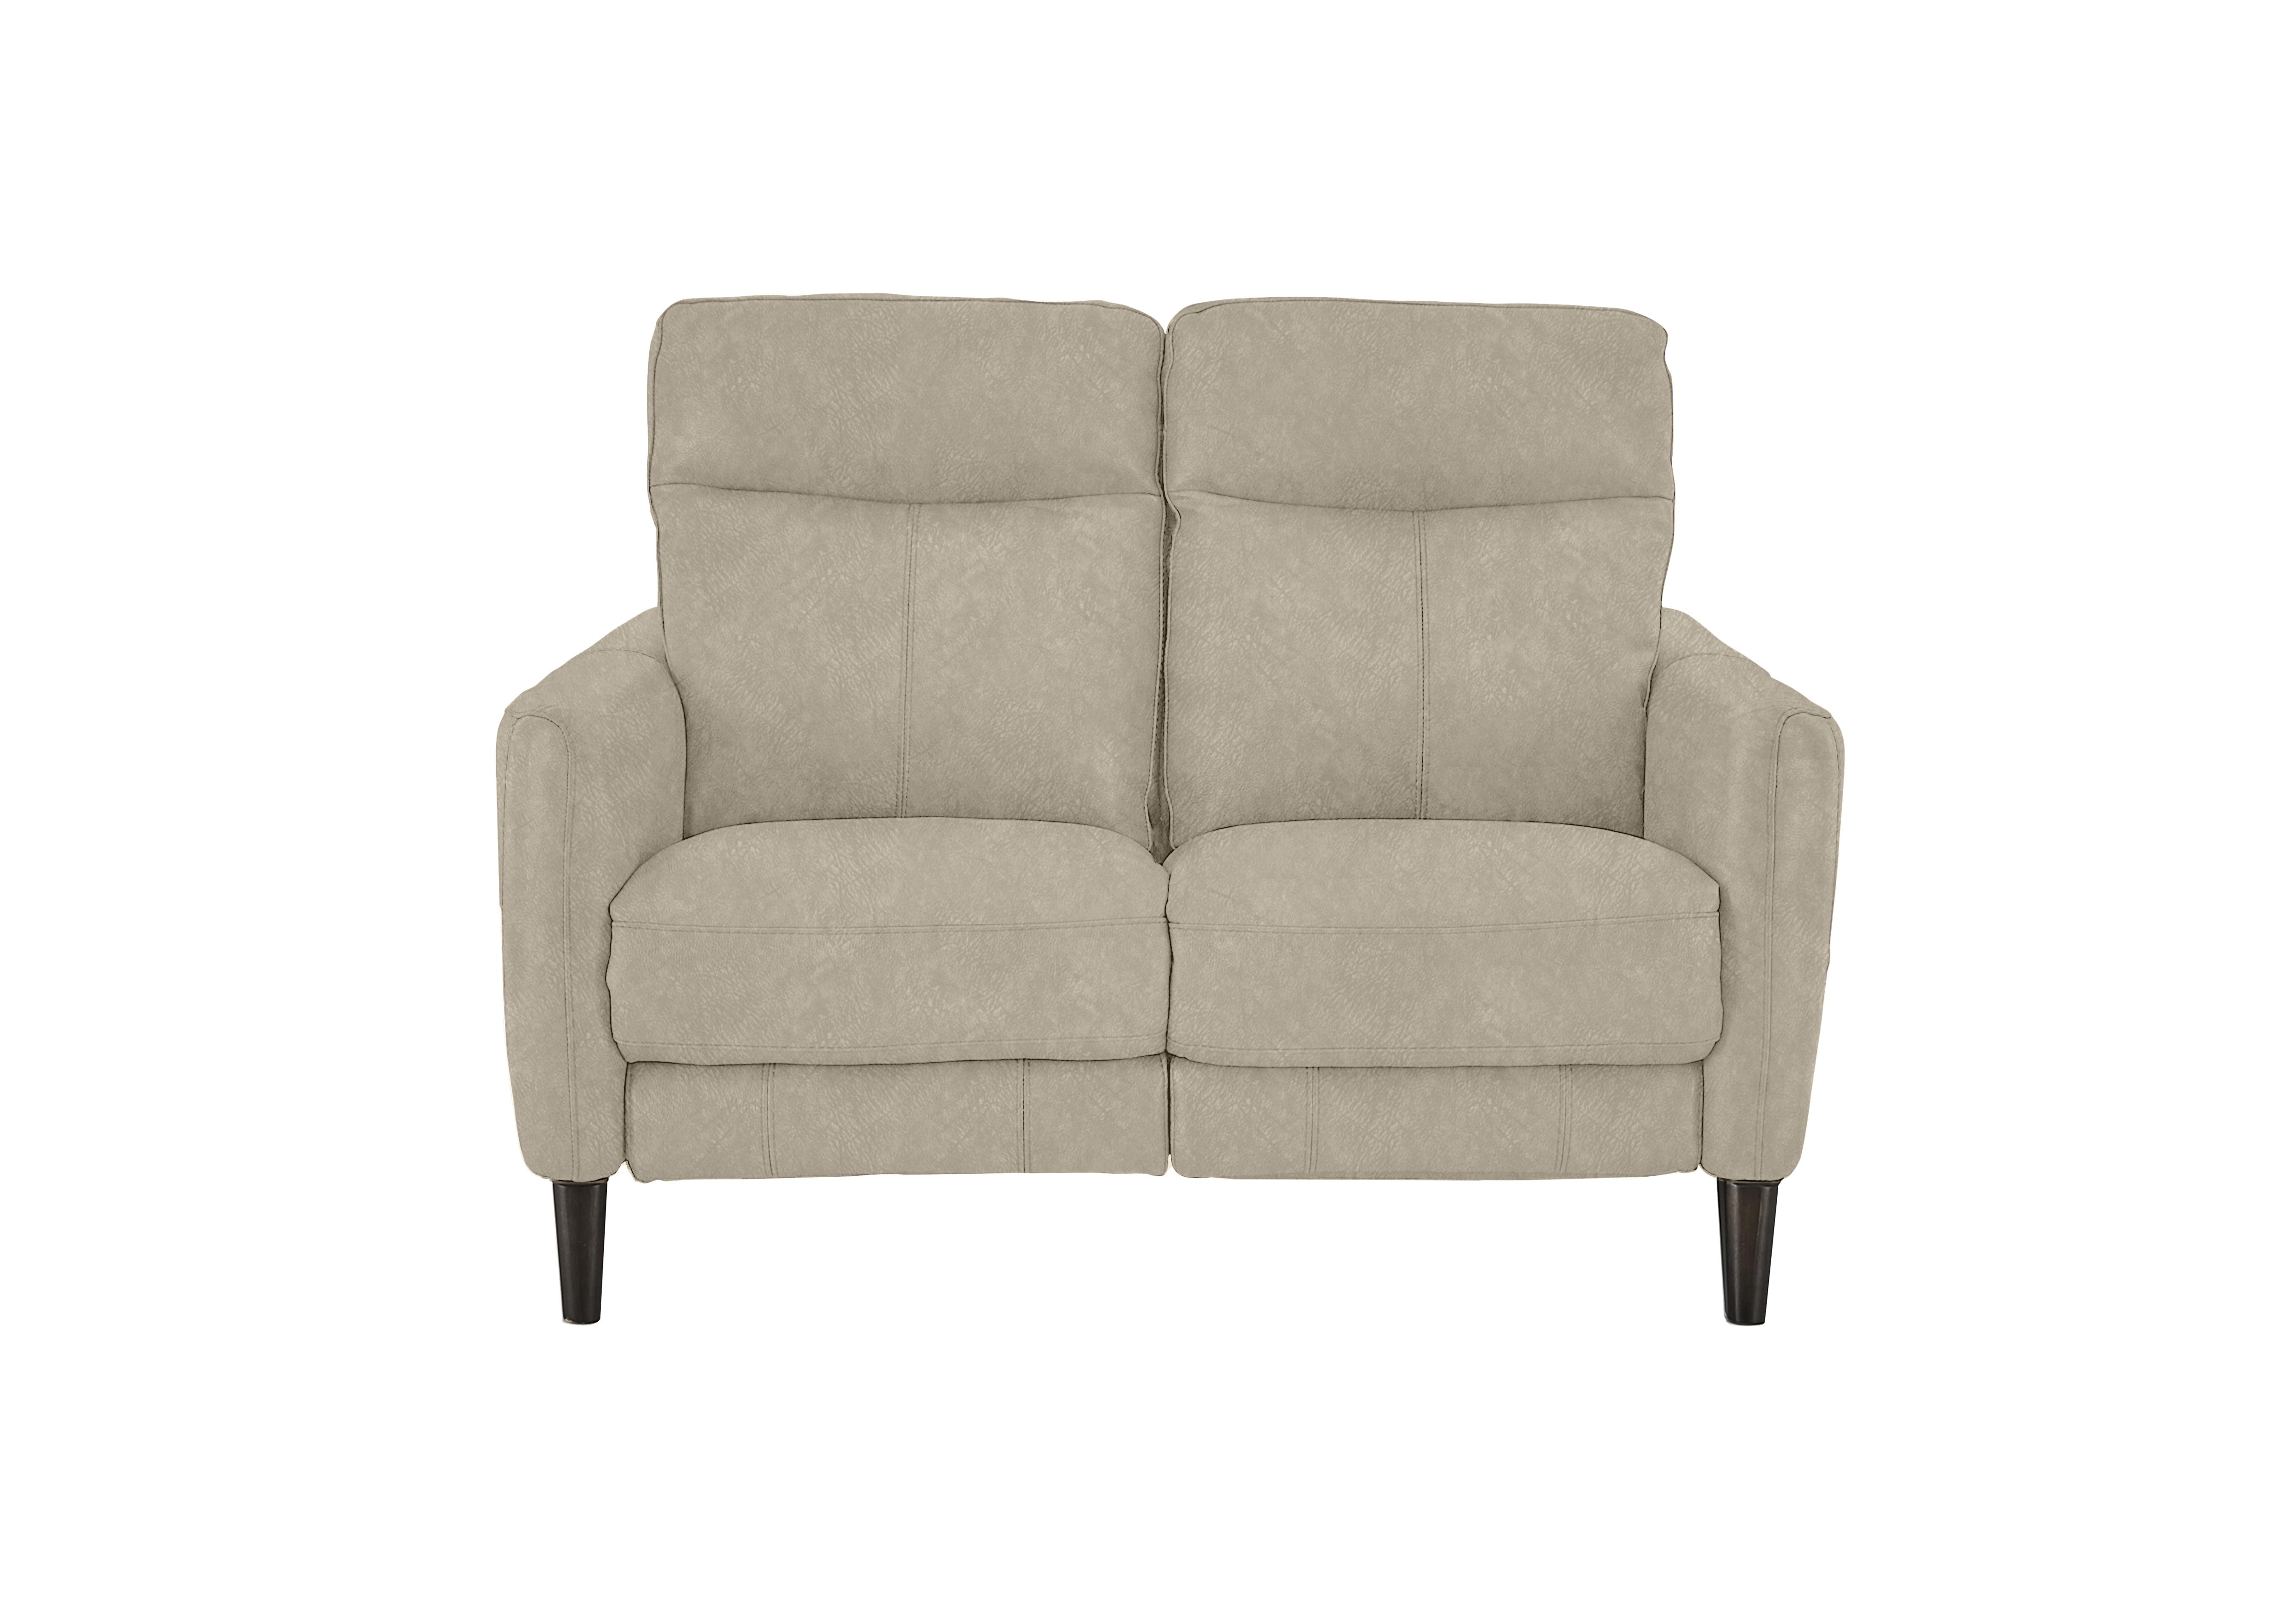 Compact Collection Petit 2 Seater Fabric Sofa in Bfa-Bnn-R26 Fv2 Cream on Furniture Village